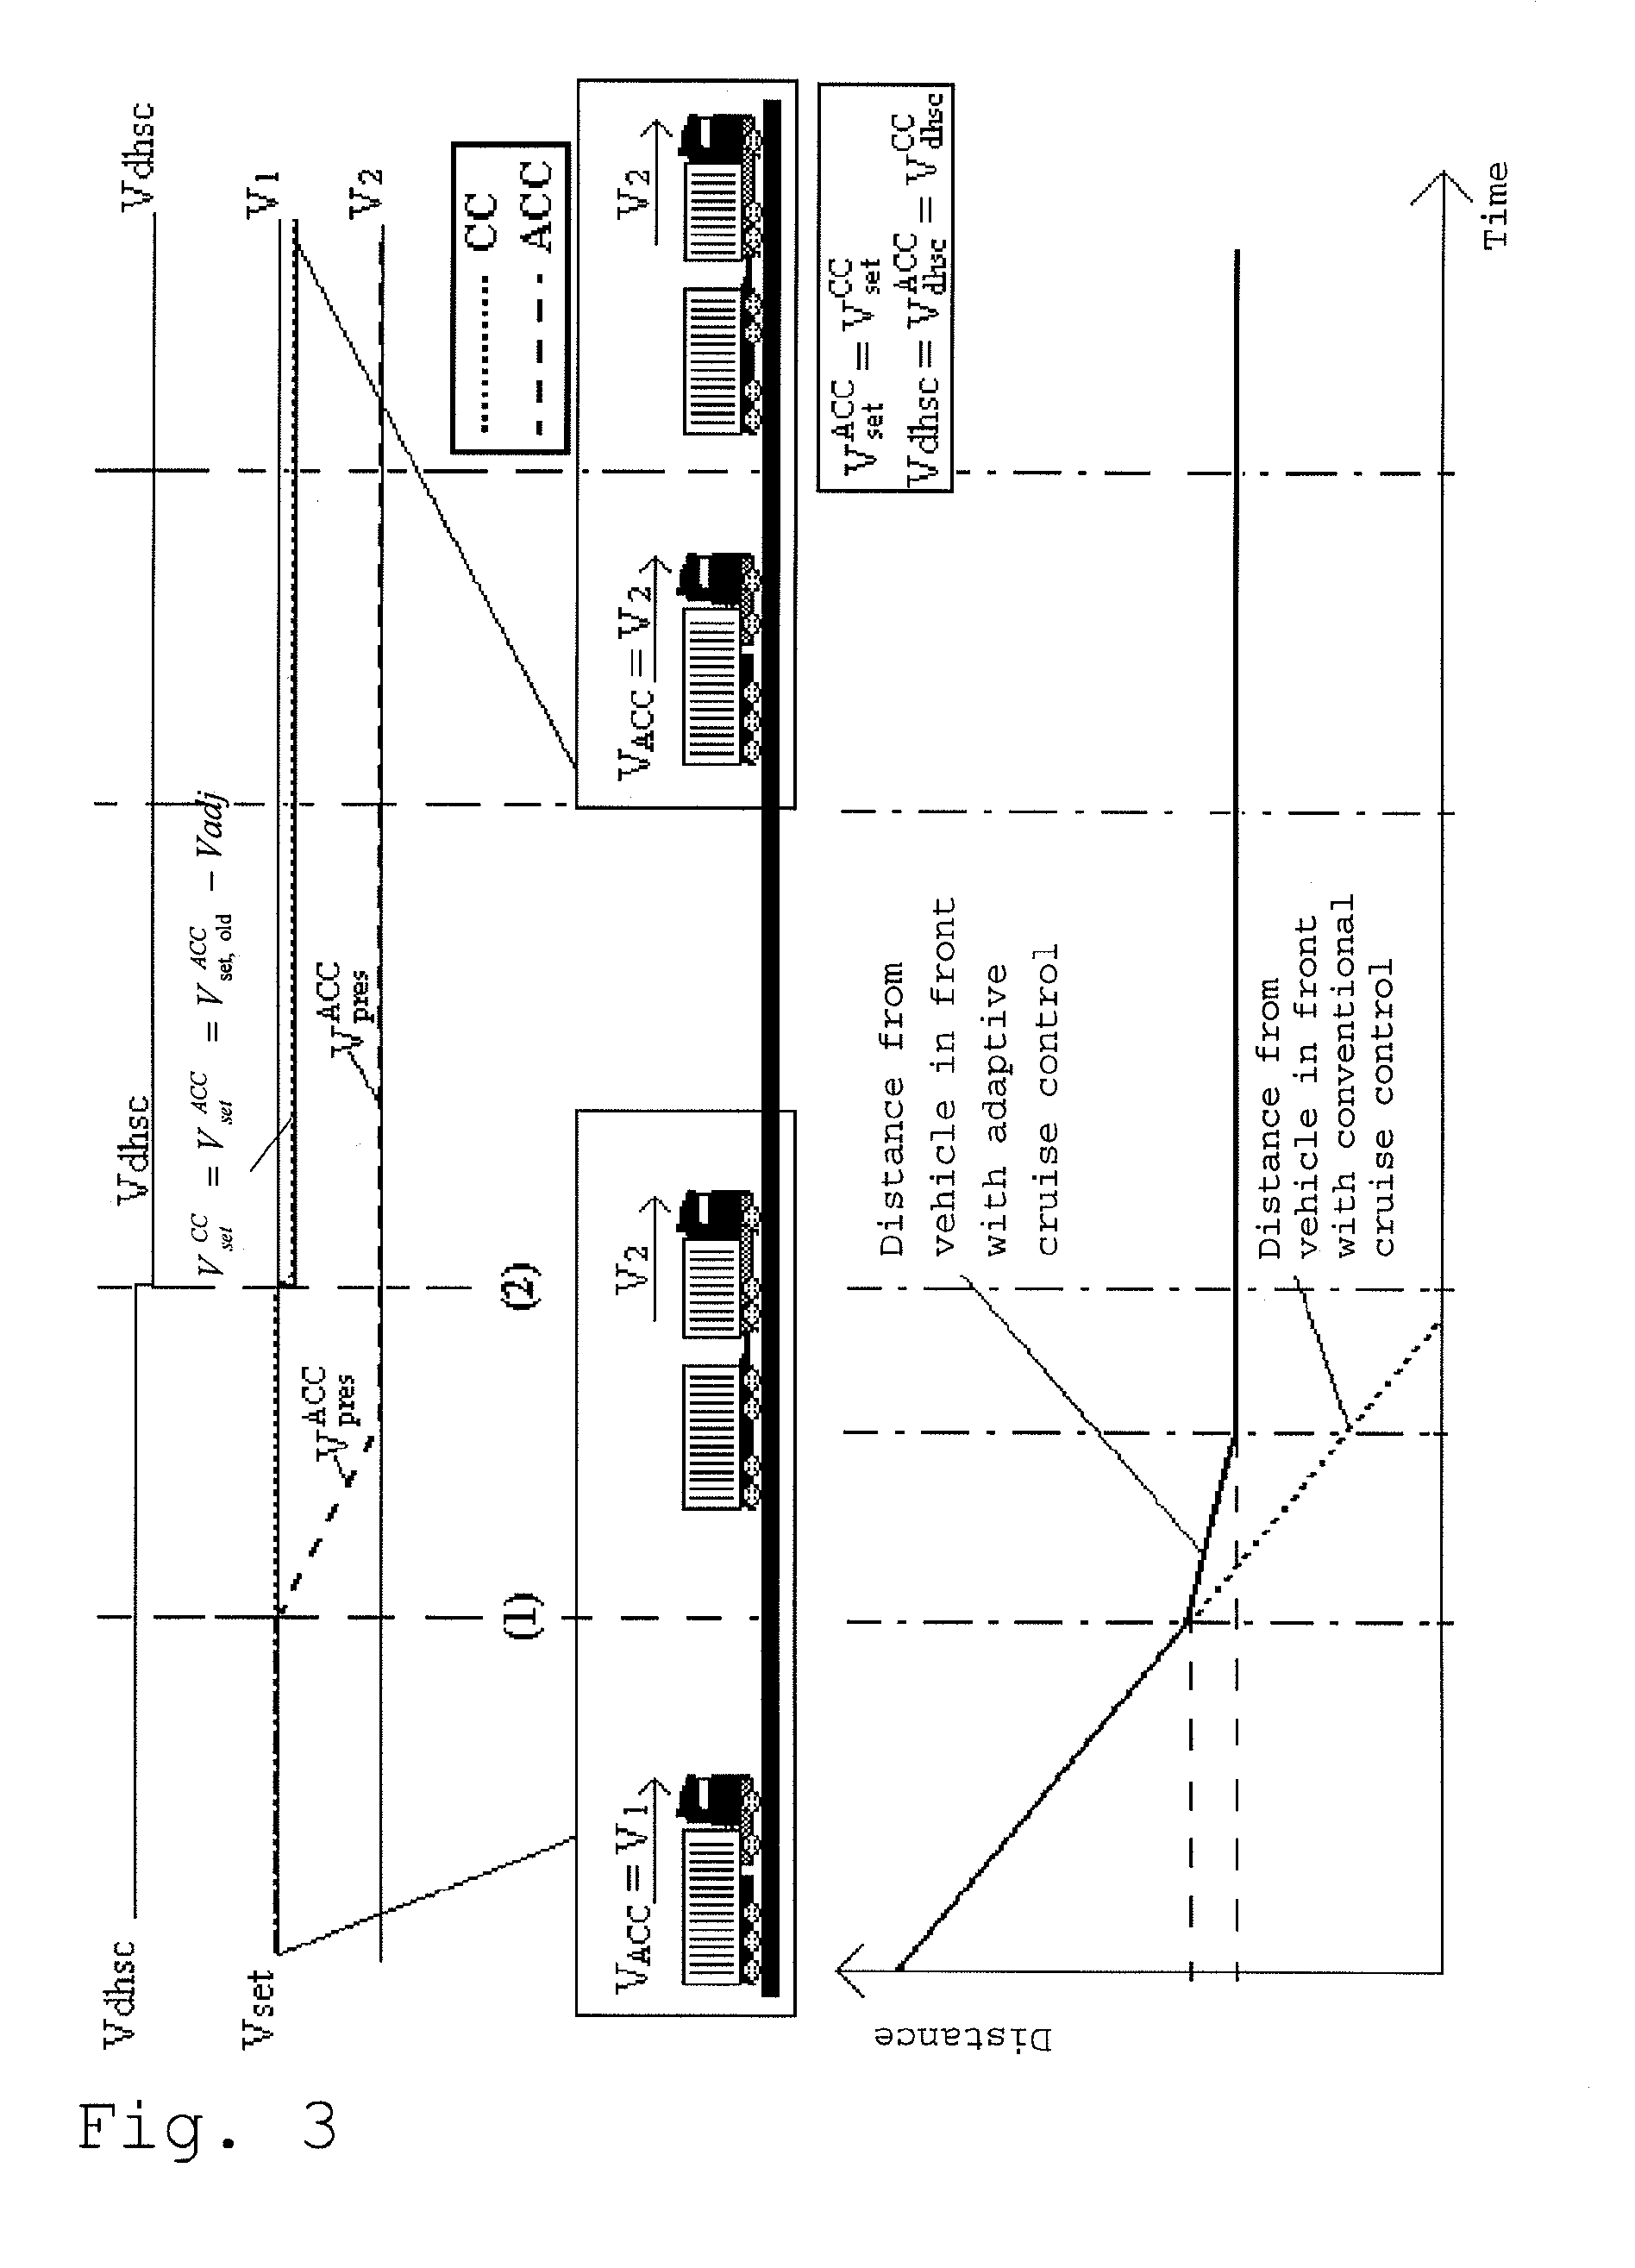 Driver interaction pertaining to reference-speed-regulating cruise control